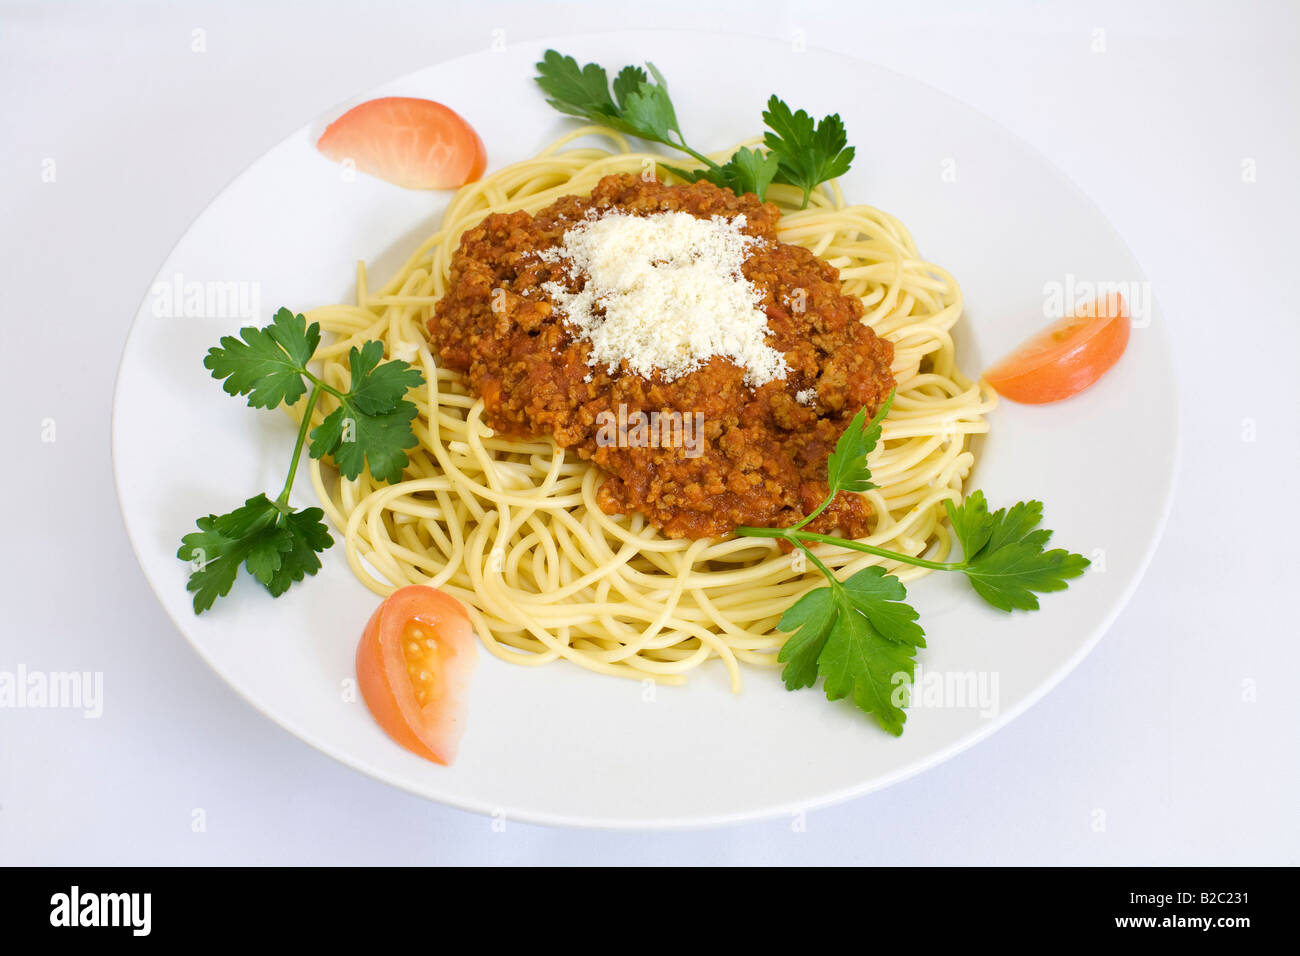 Spaghetti bolognese with parmesan cheese, garnished with tomato wedges and flat leaf parsley Stock Photo